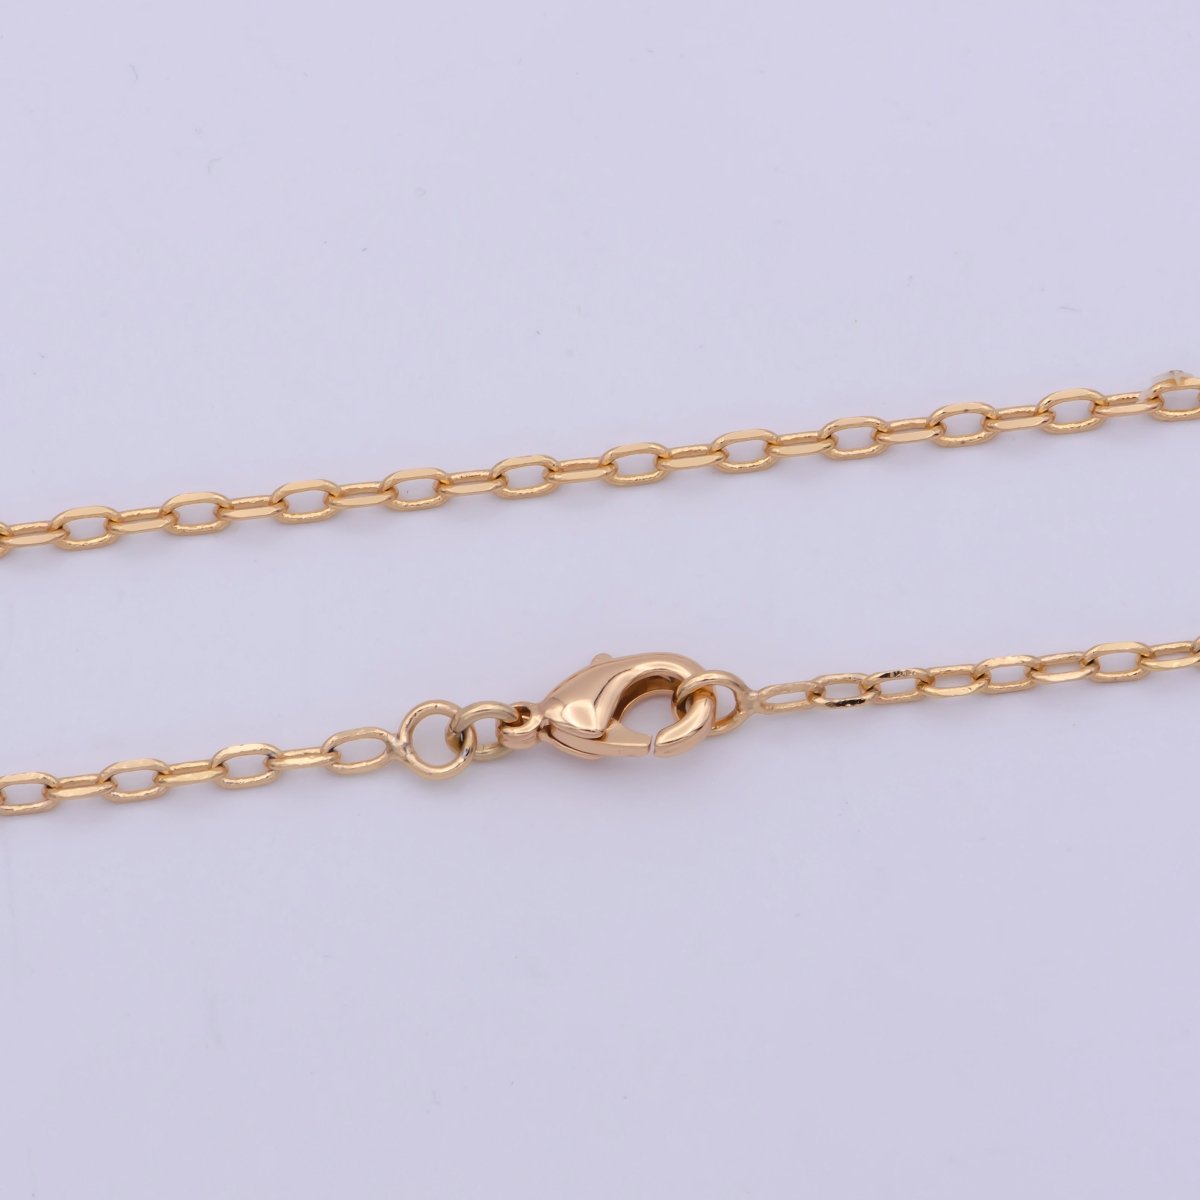 18K Gold Filled Cable Chain Necklace, 21.4 Inch Cable Chain Necklace, Dainty 1.7mm Link Necklace | WA-478 Clearance Pricing - DLUXCA